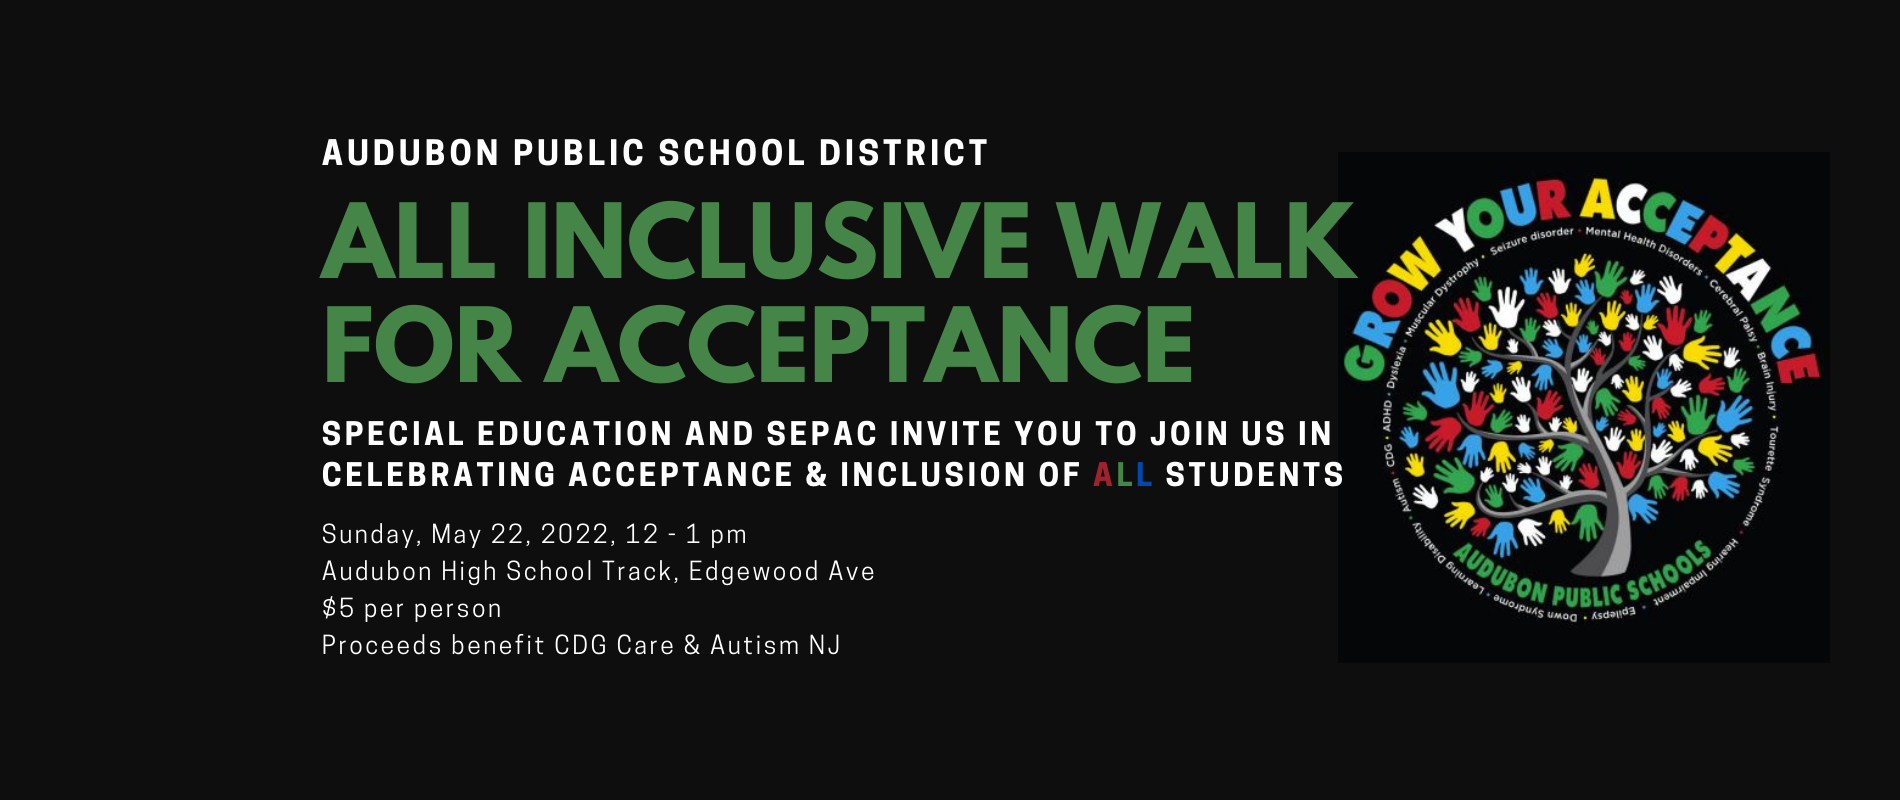 Special Education T-Shirt Sale & 
All Inclusive Walk for Acceptance